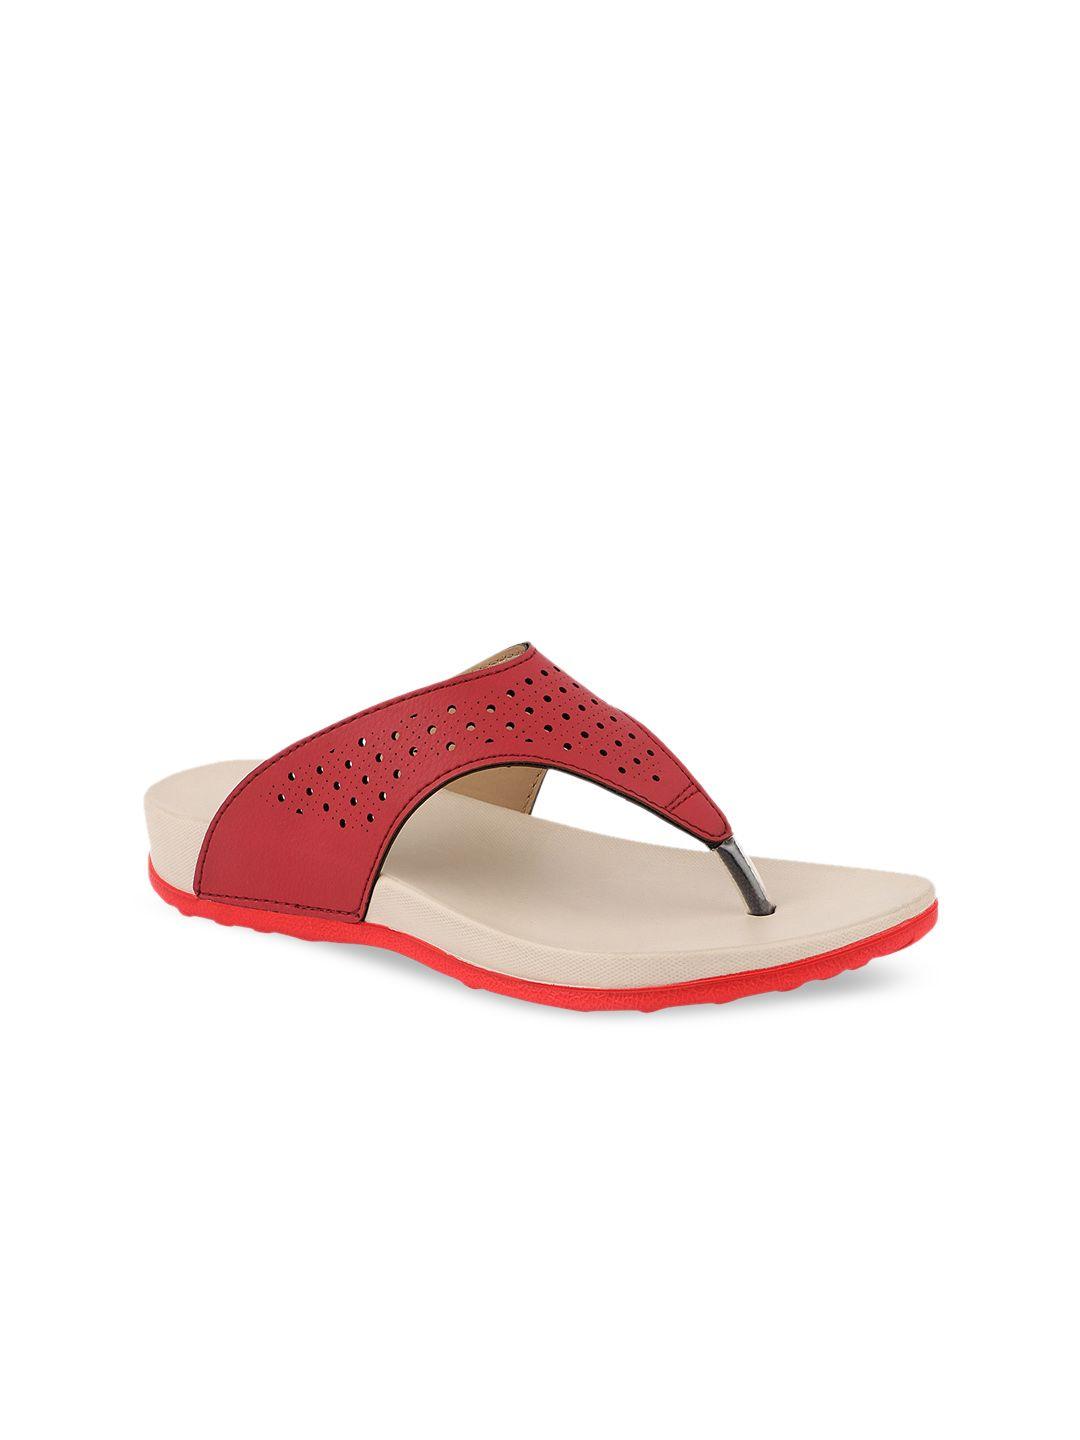 welcome-women-red-ethnic-t-strap-flats-with-laser-cuts